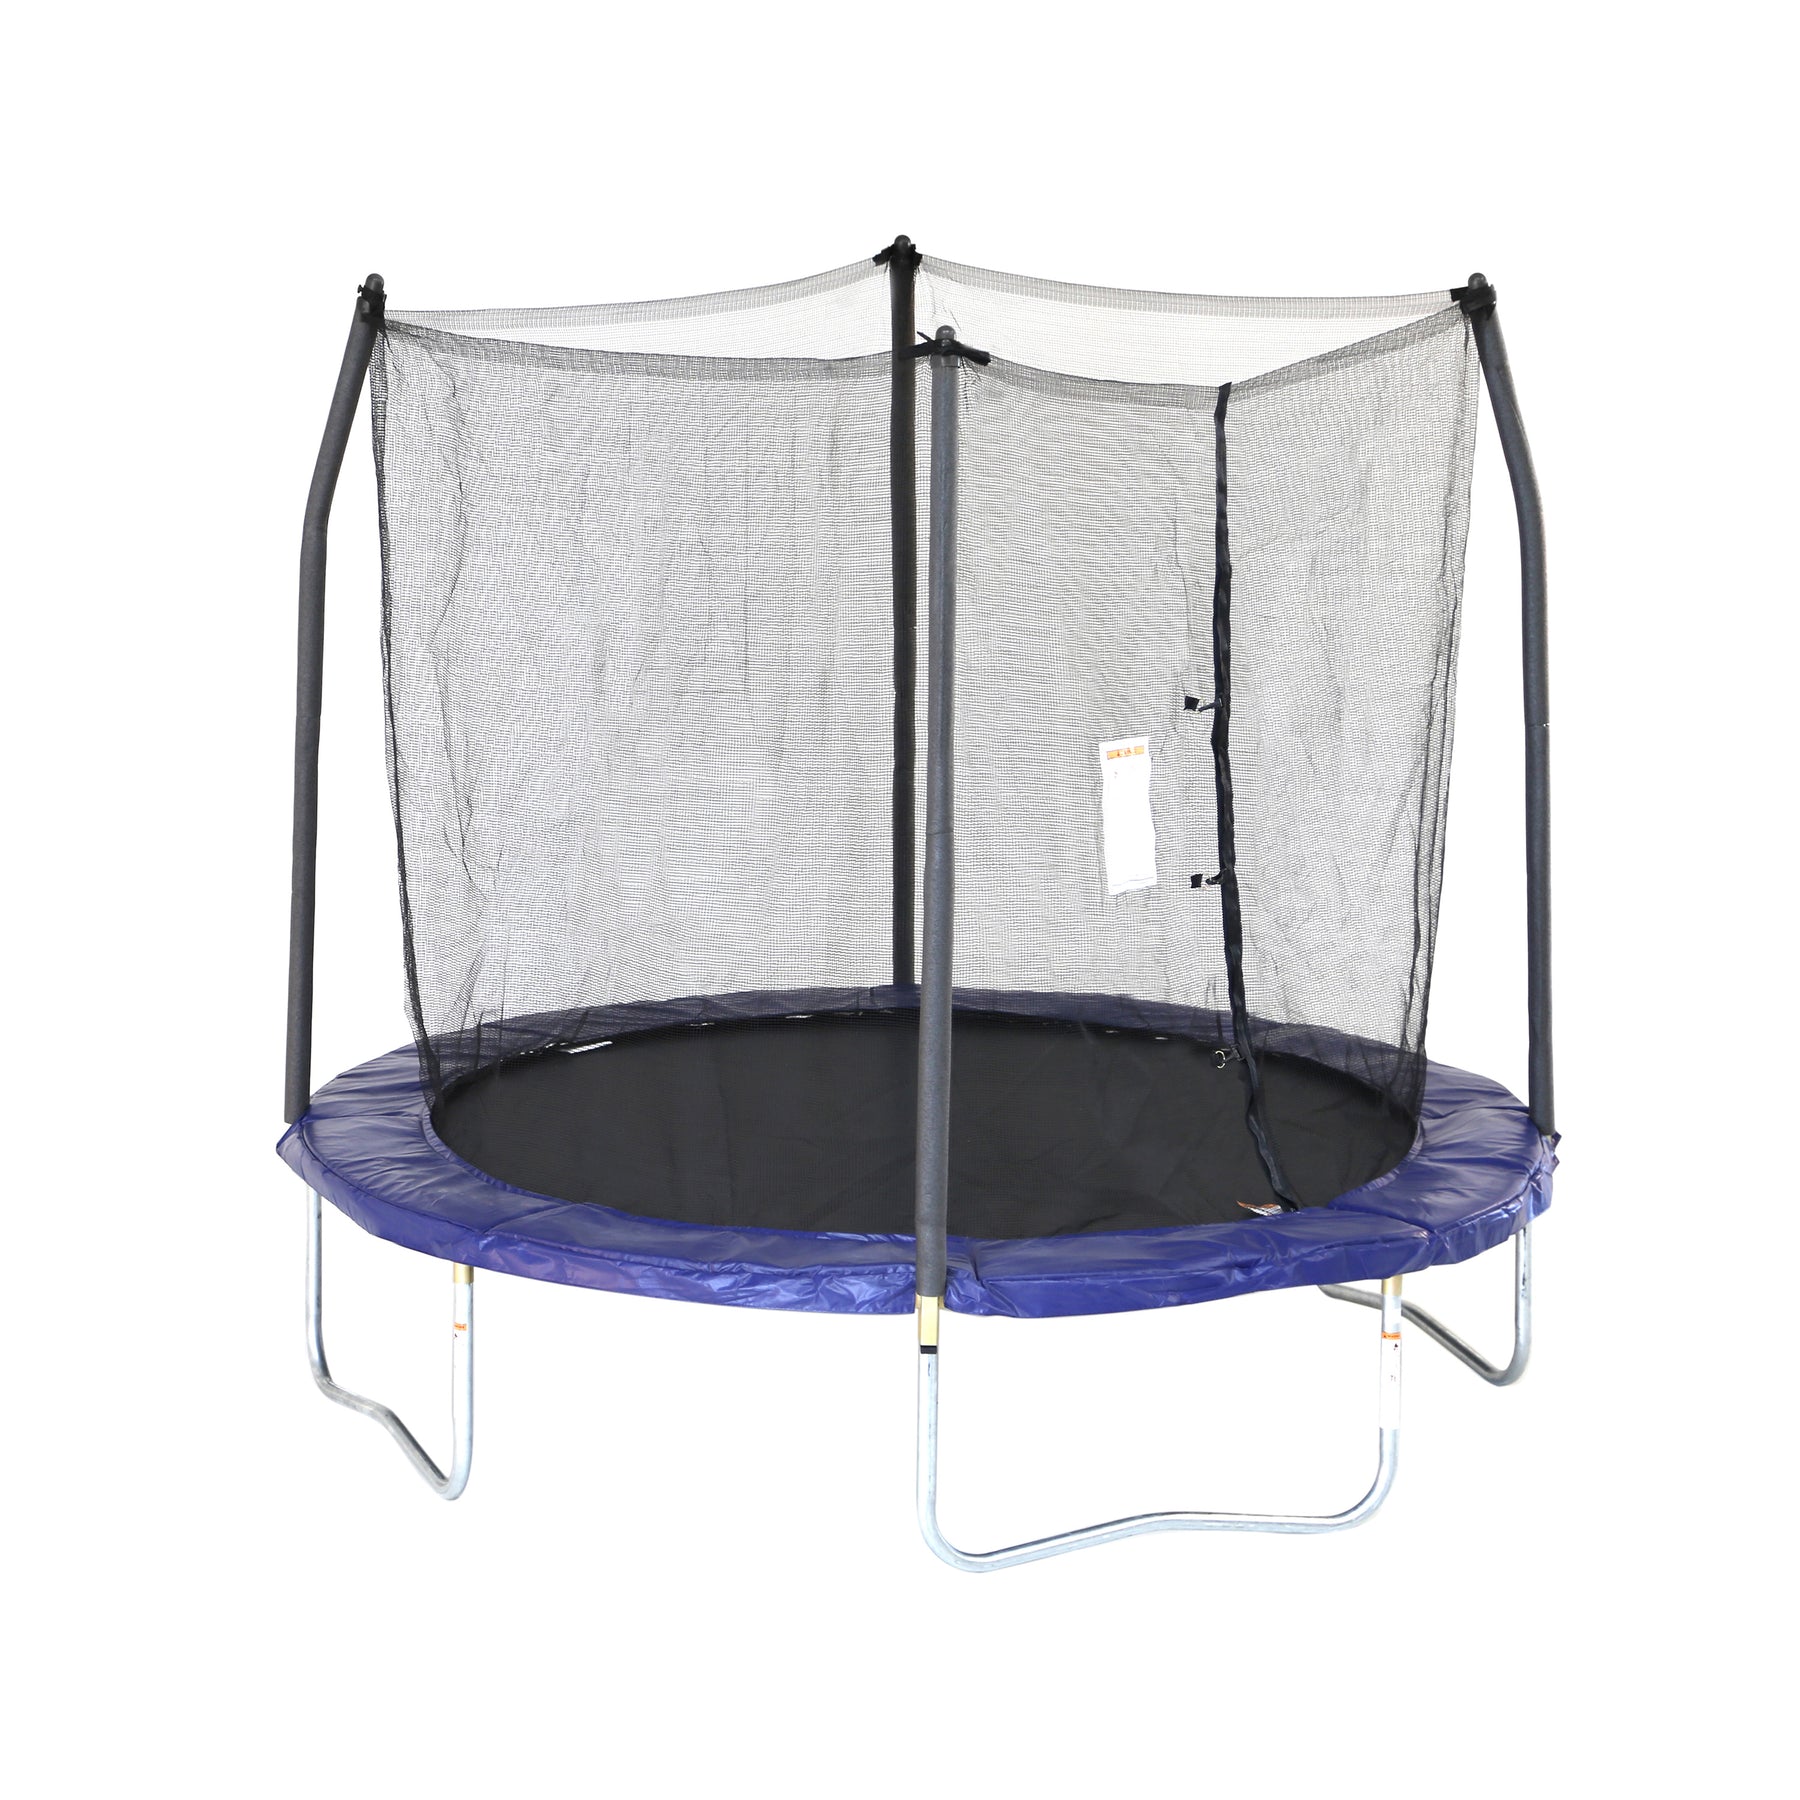 A Skywalker 8 ft Round Trampoline on a white backdrop.